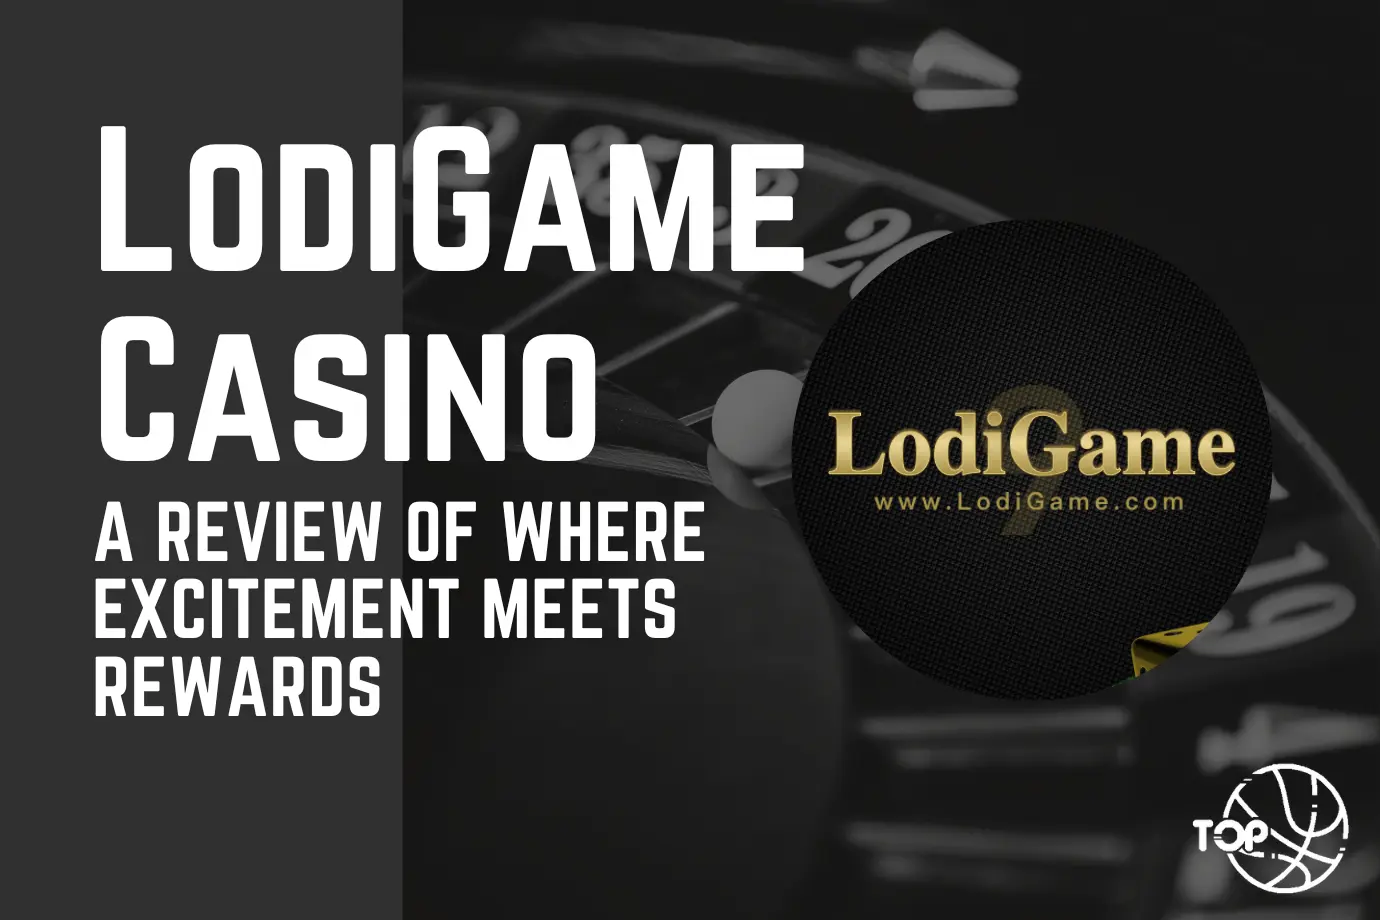 LodiGame Casino: A Review of Where Excitement Meets Rewards